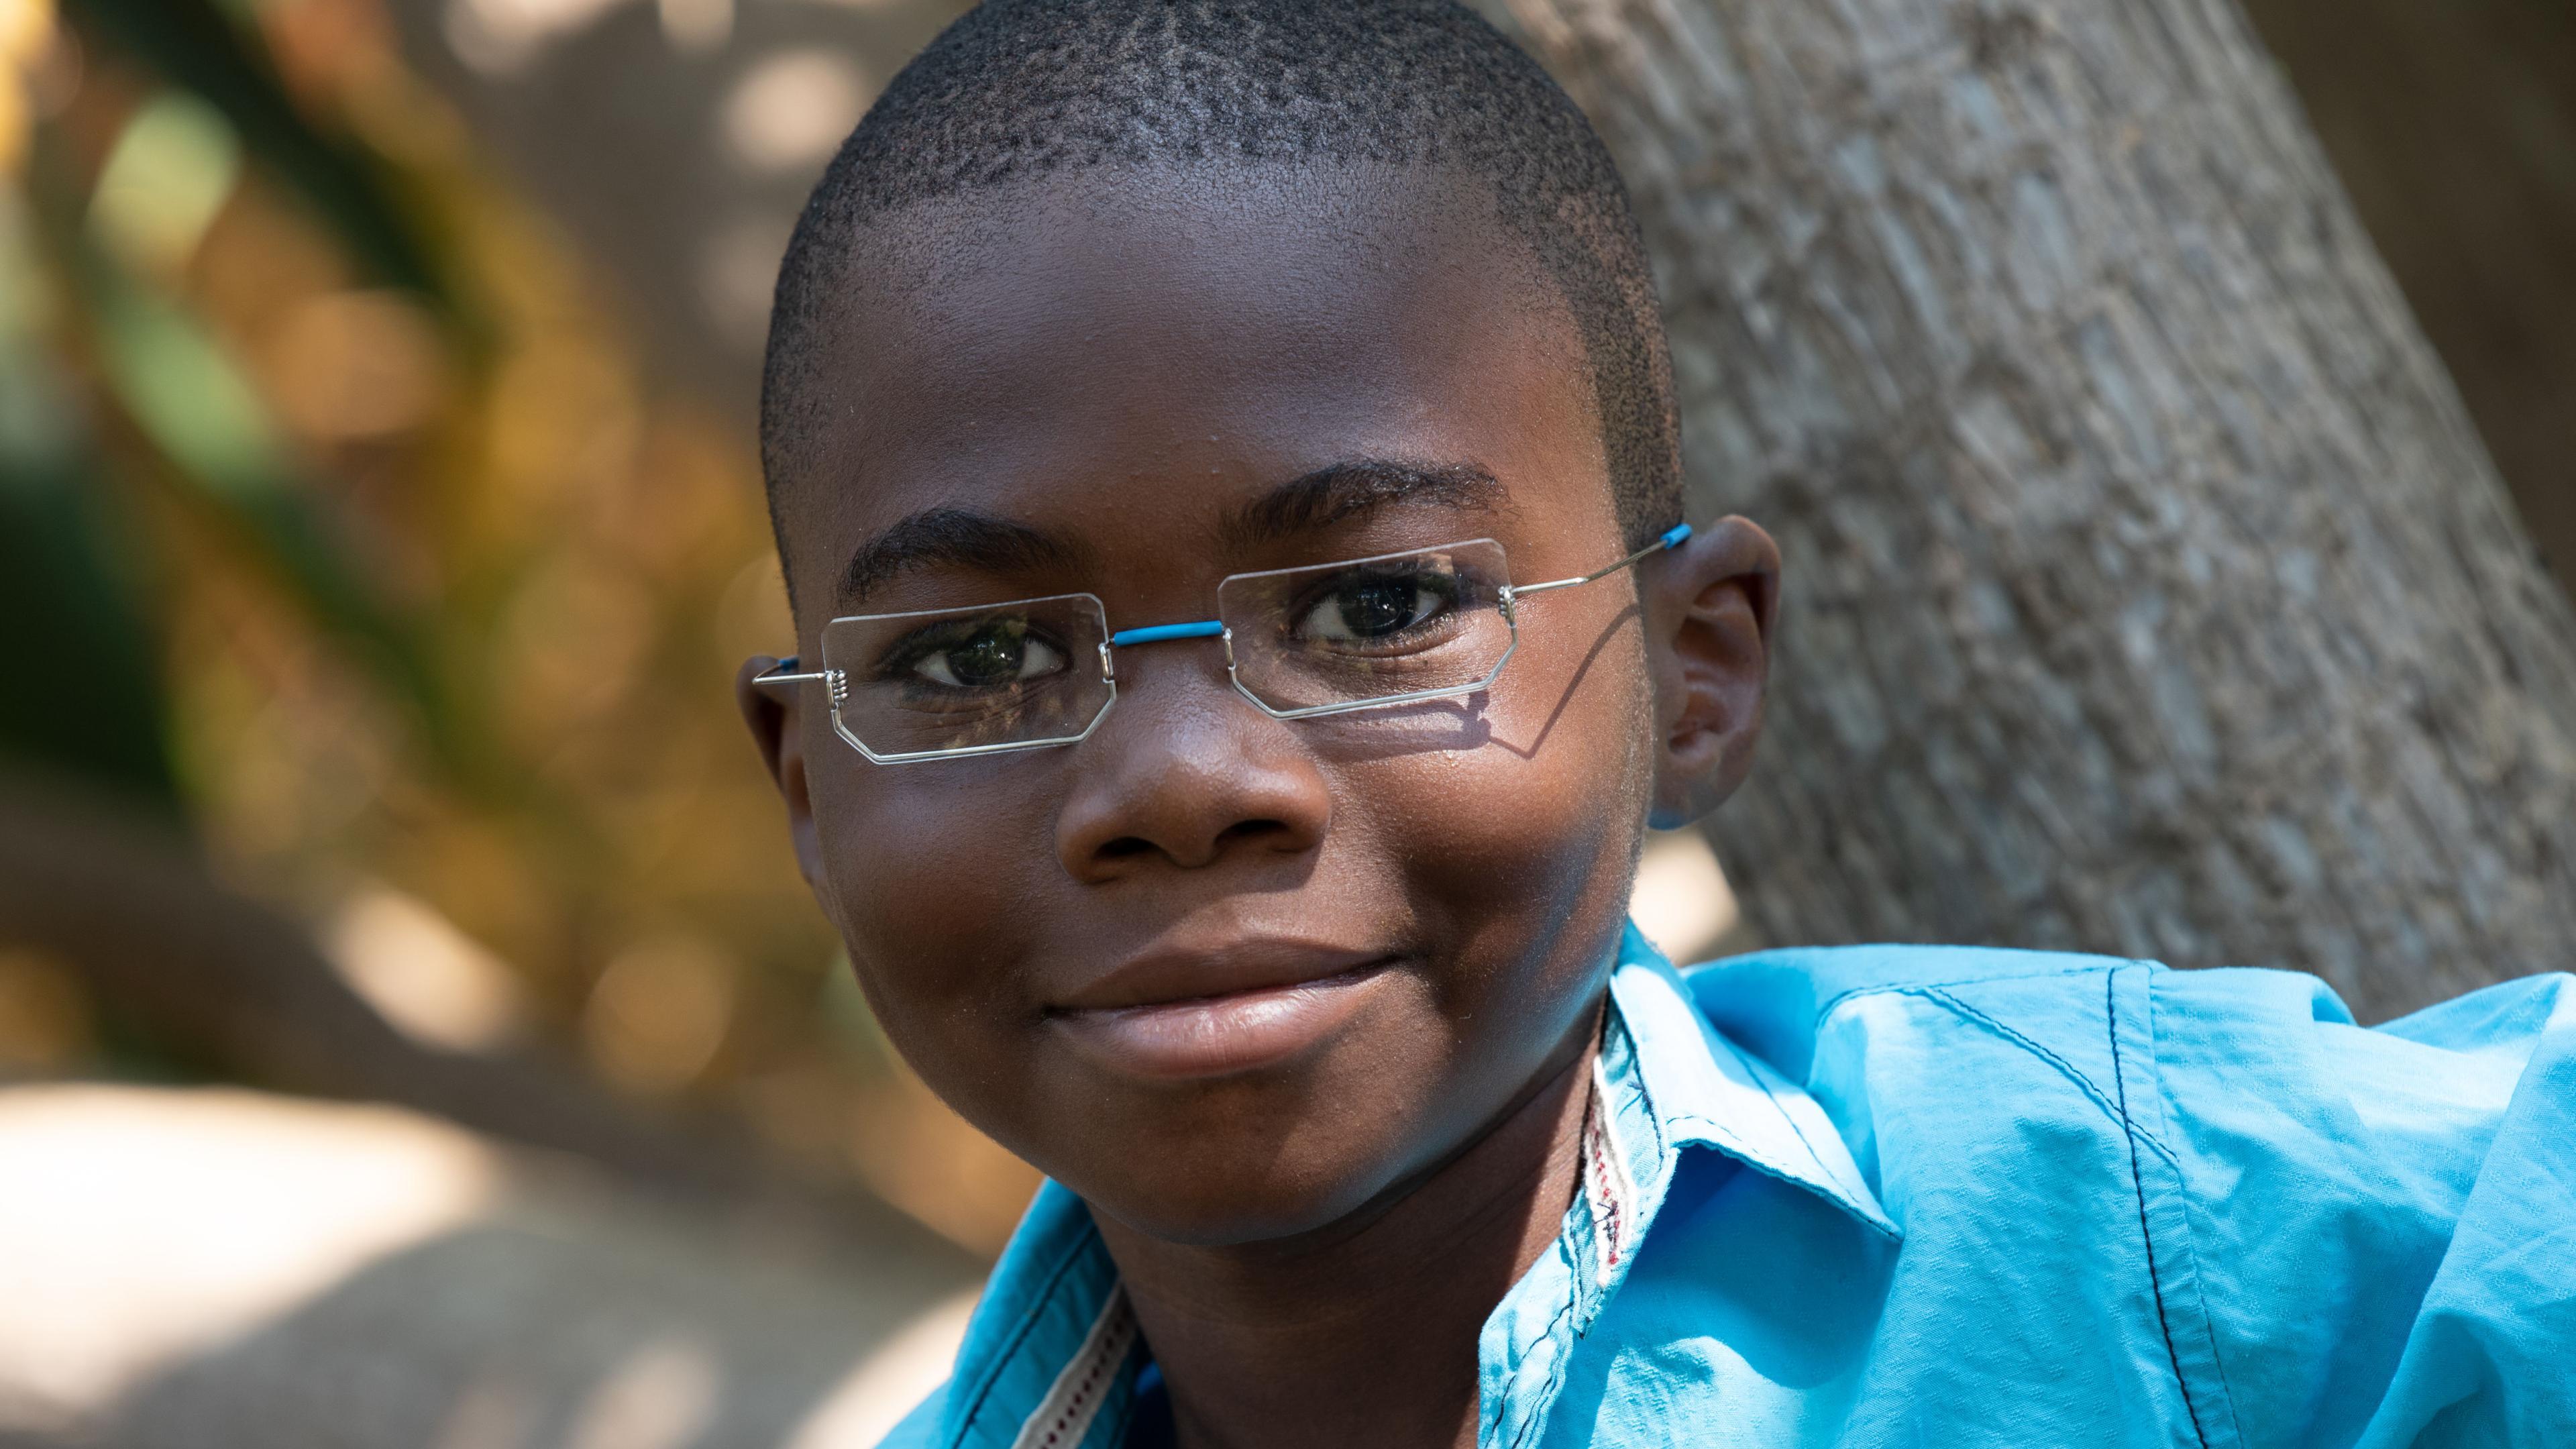 Malawian boy with GoodVision Glasses and square lenses